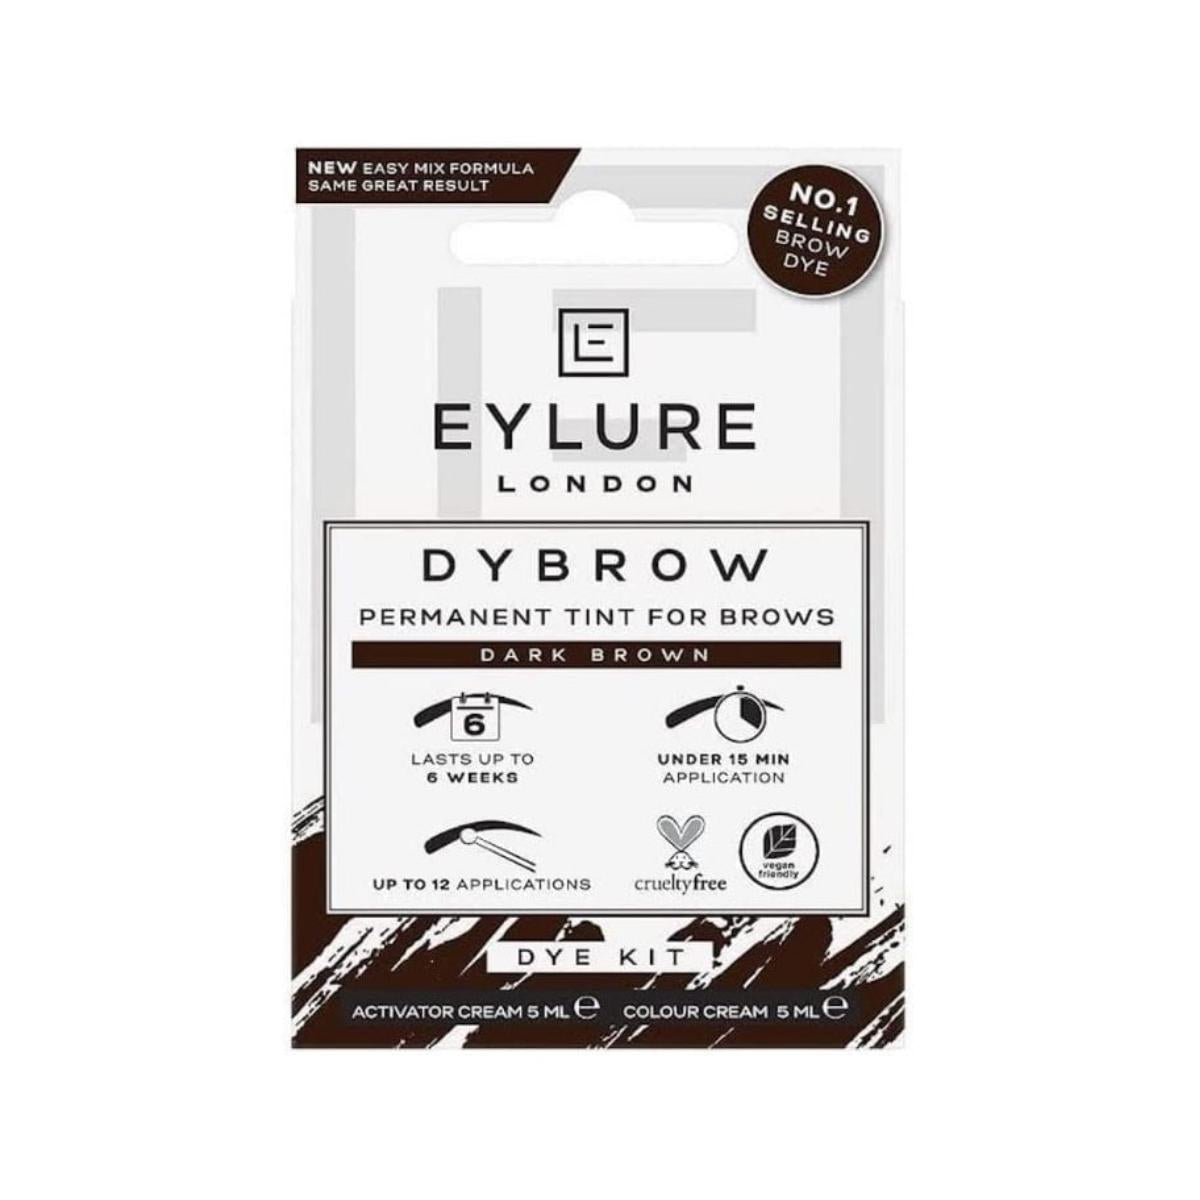 Eylure Dybrow Tint For Brows Dark Brown